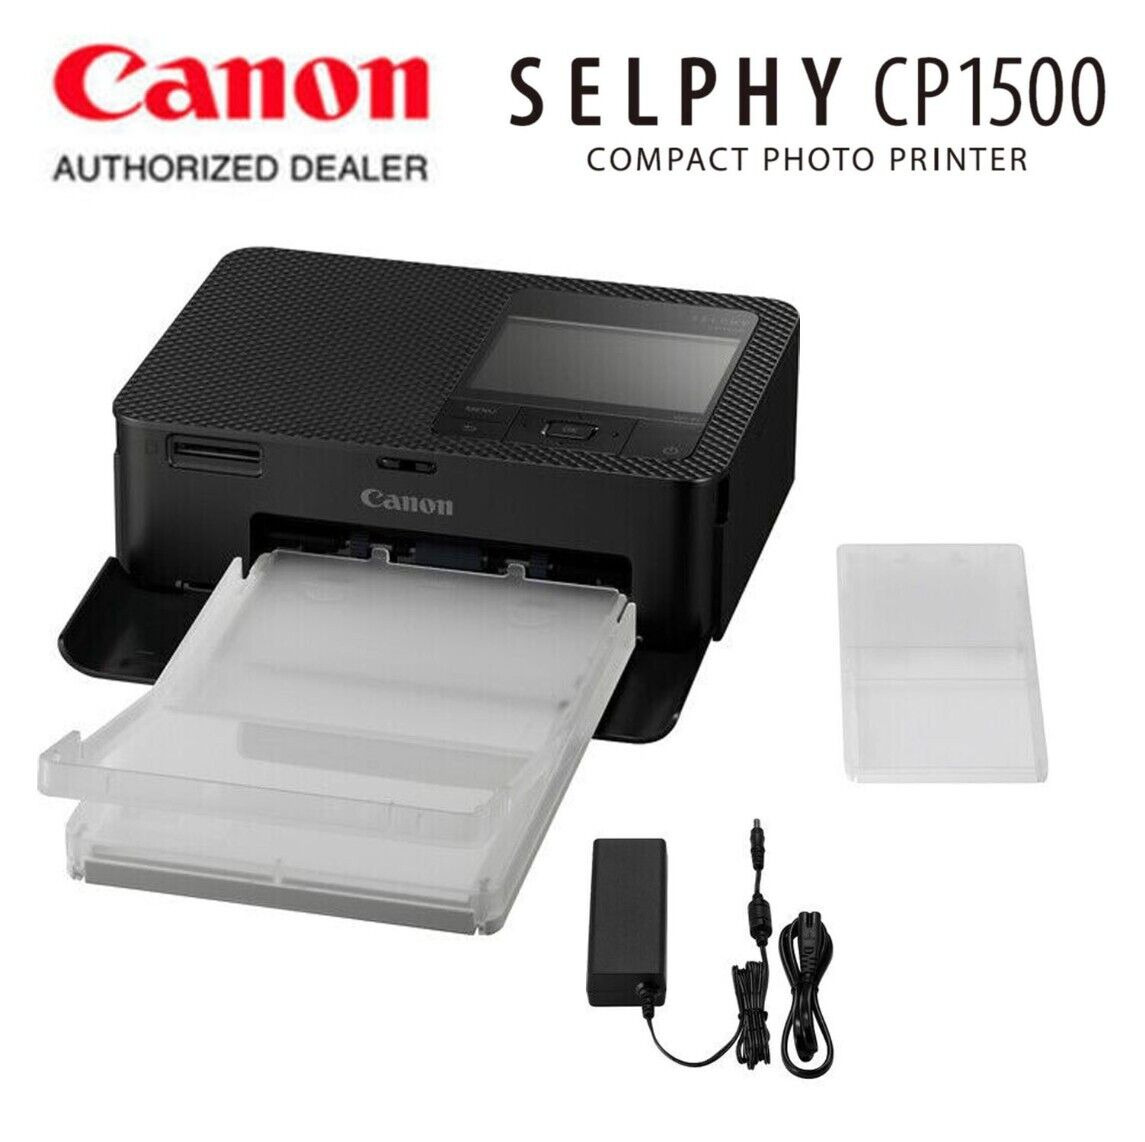 NEW Canon SELPHY CP1500 Wireless Compact Photo Printer (Black)